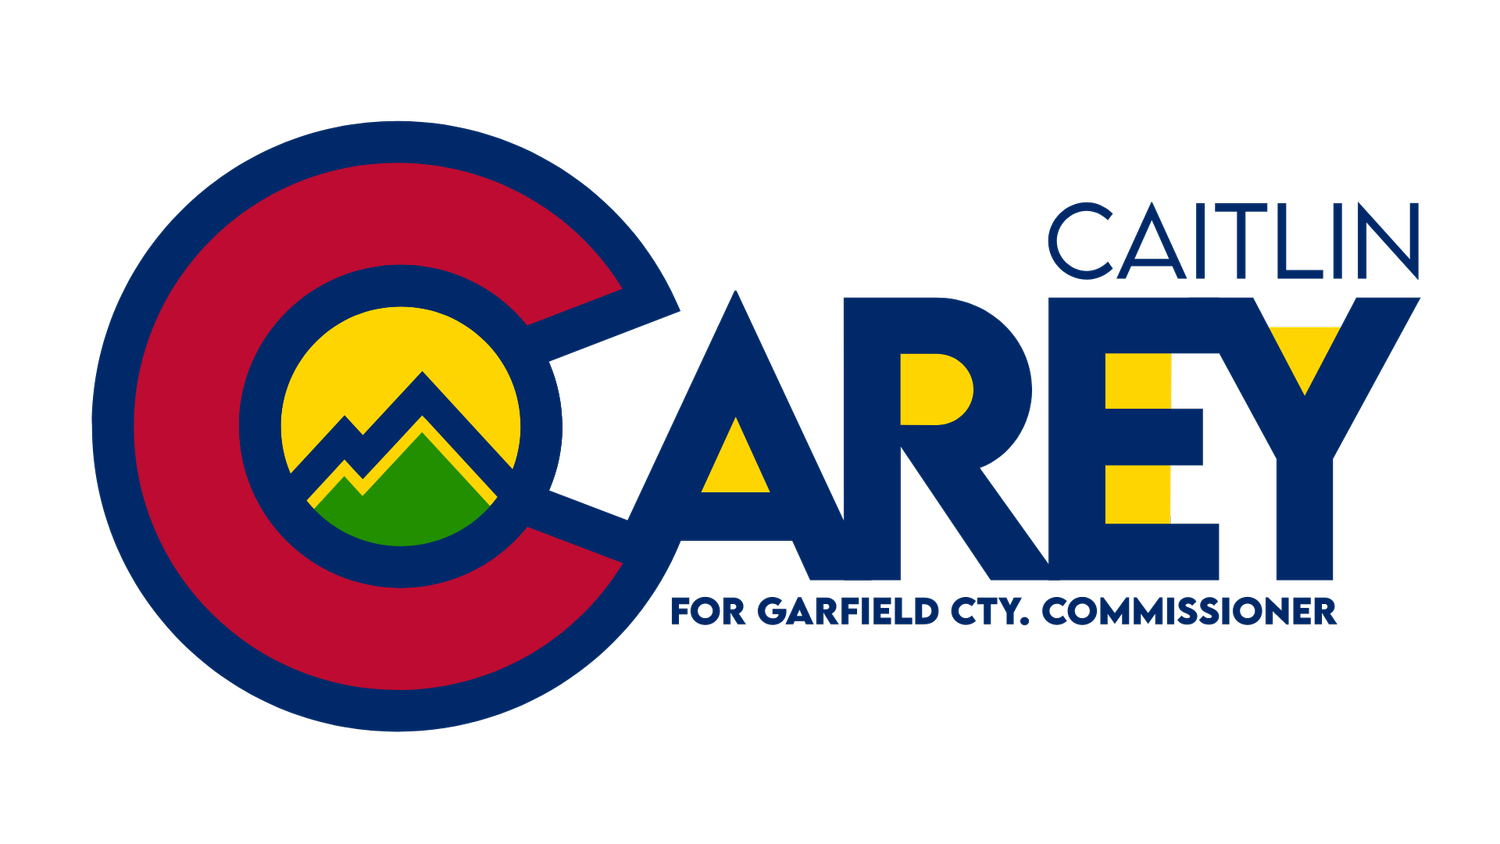 Caitlin Carey for Garfield County Commissioner